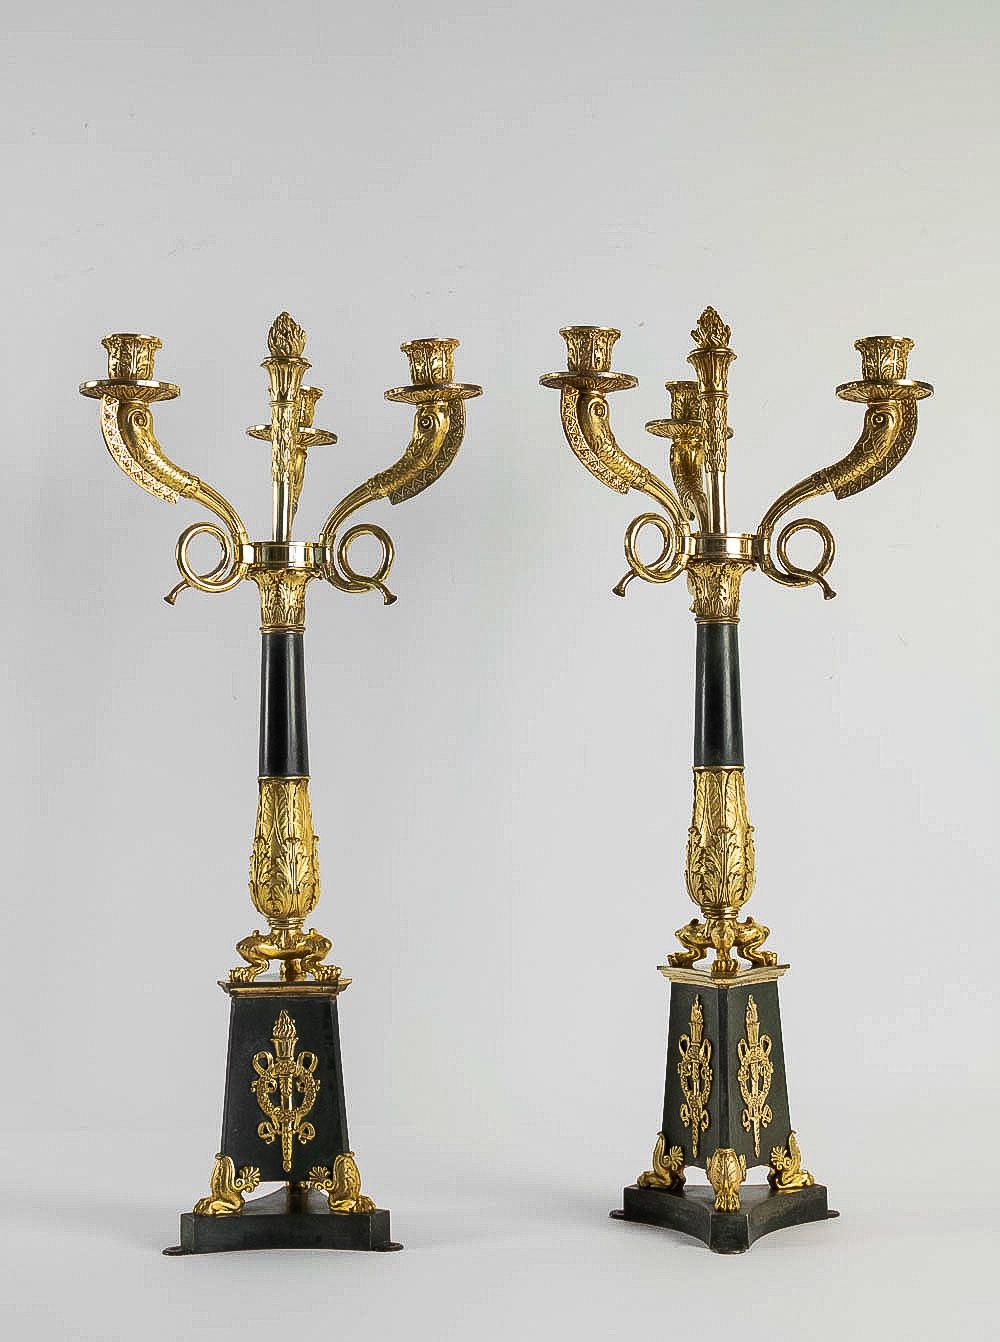 A magnificent large pair of three-light gilt-bronze and patinated-bronze Empire or Restauration period candelabra, manufactured in the early-19th century circa 1800s. This pair of candelabra is set on a patinated-bronze base with ormolu mounts held